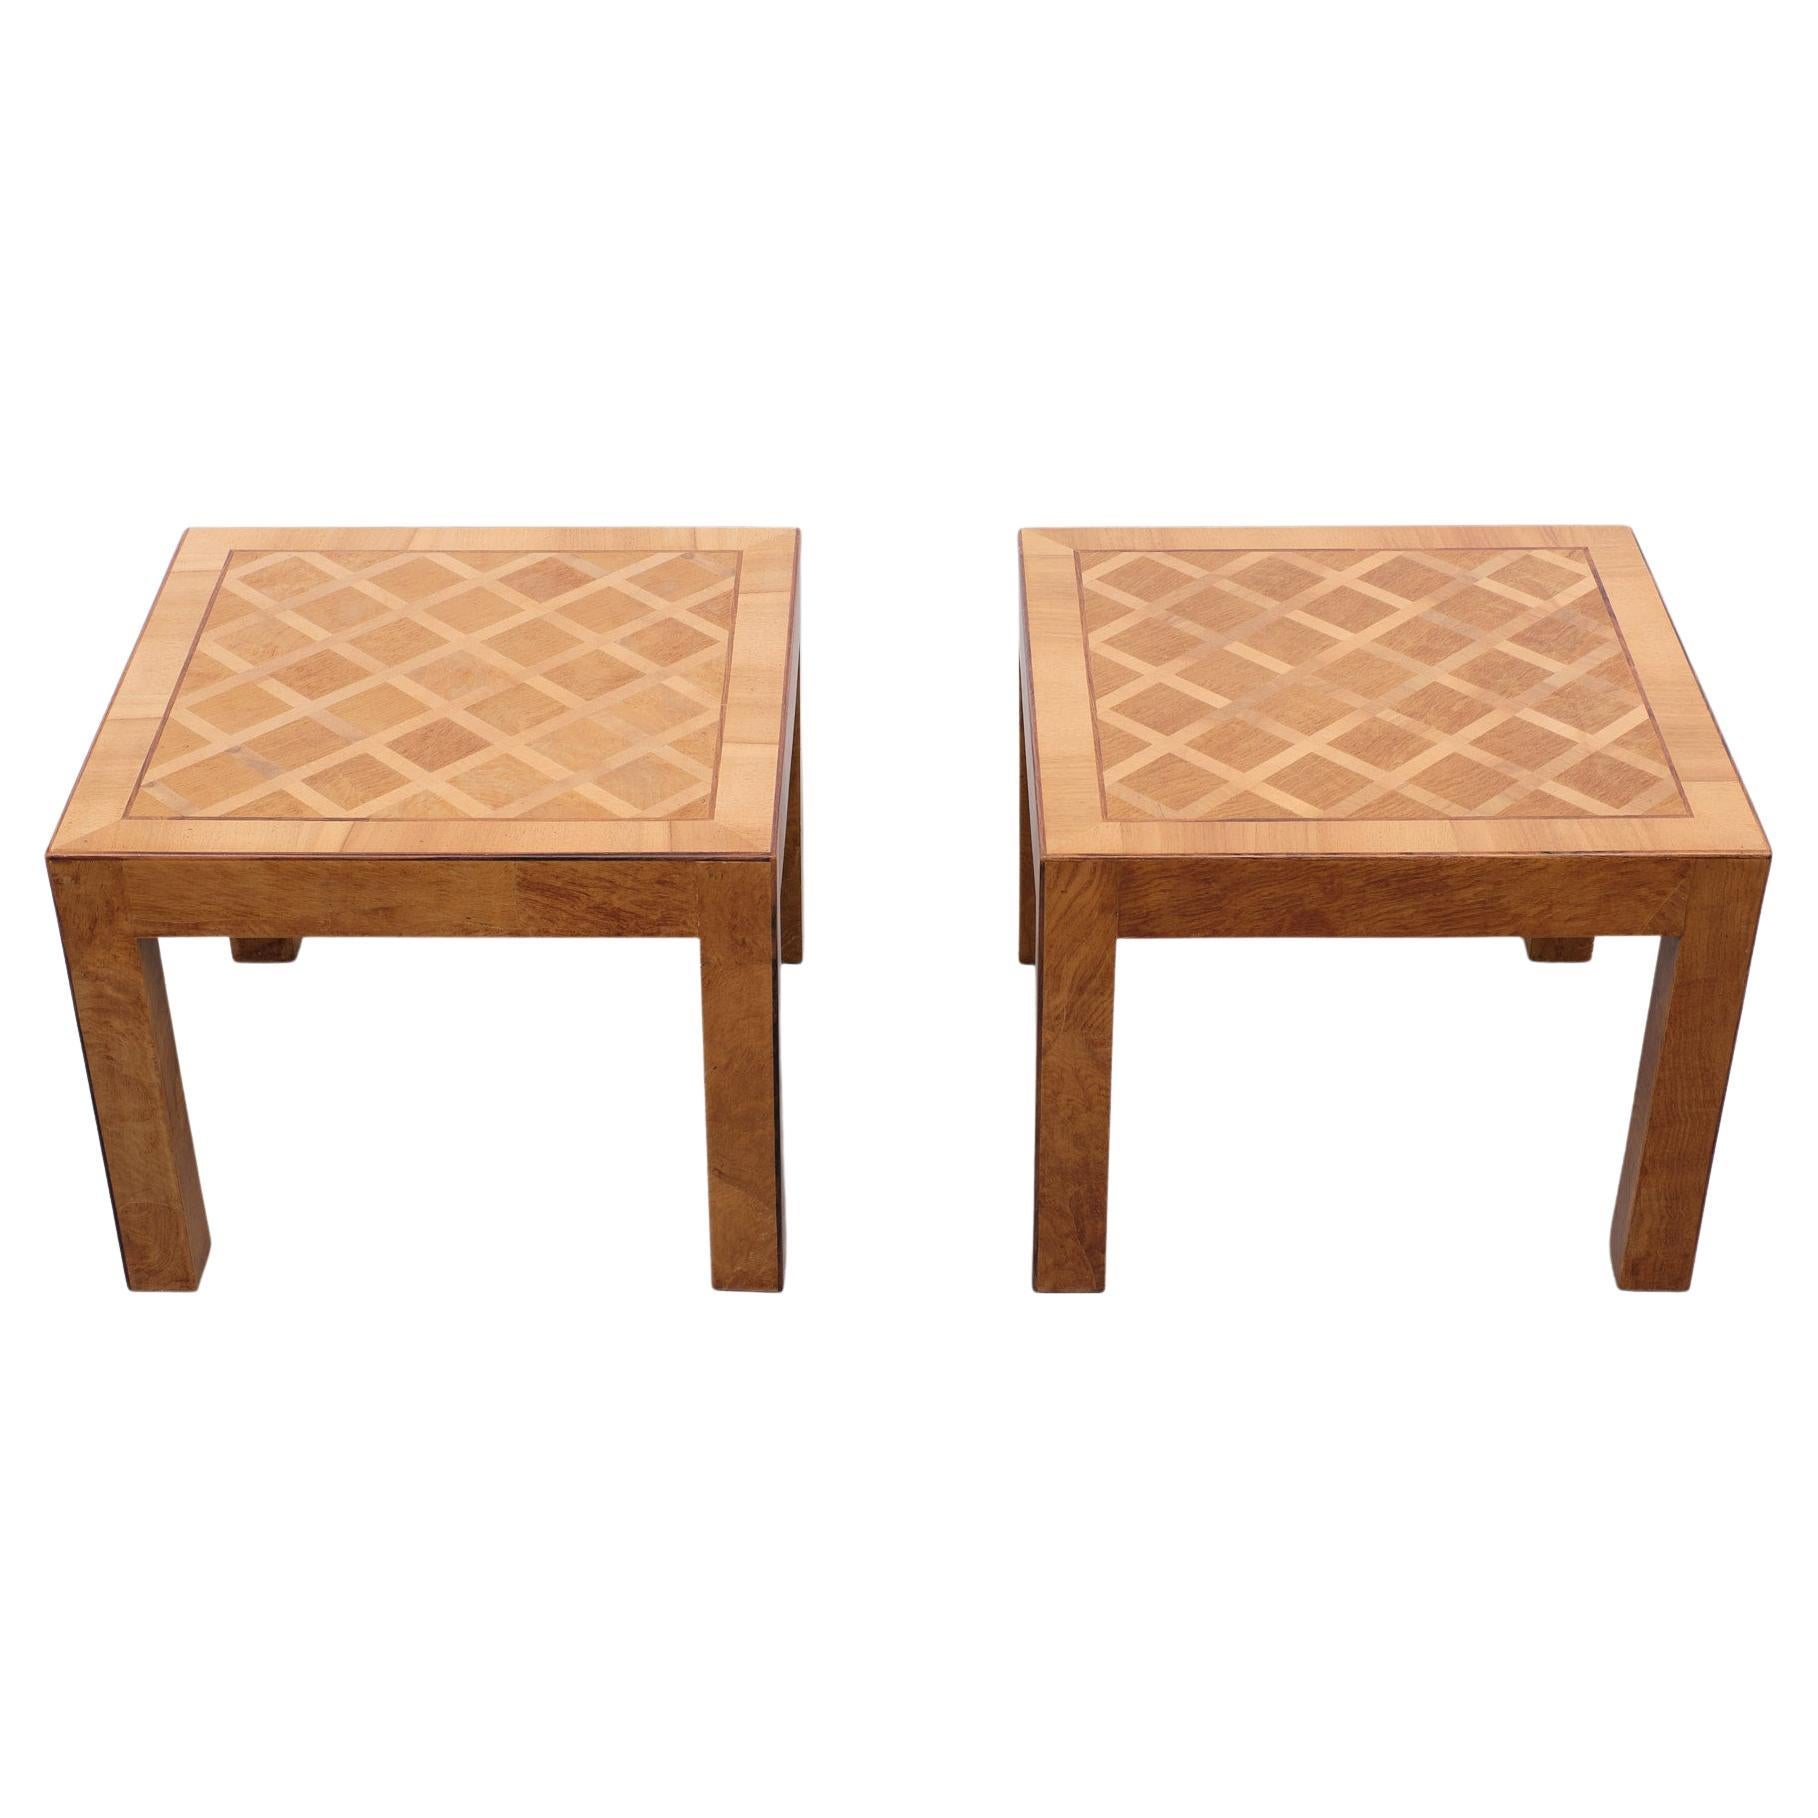 Italian Checkerboard Inlay Side Tables, 1960s For Sale